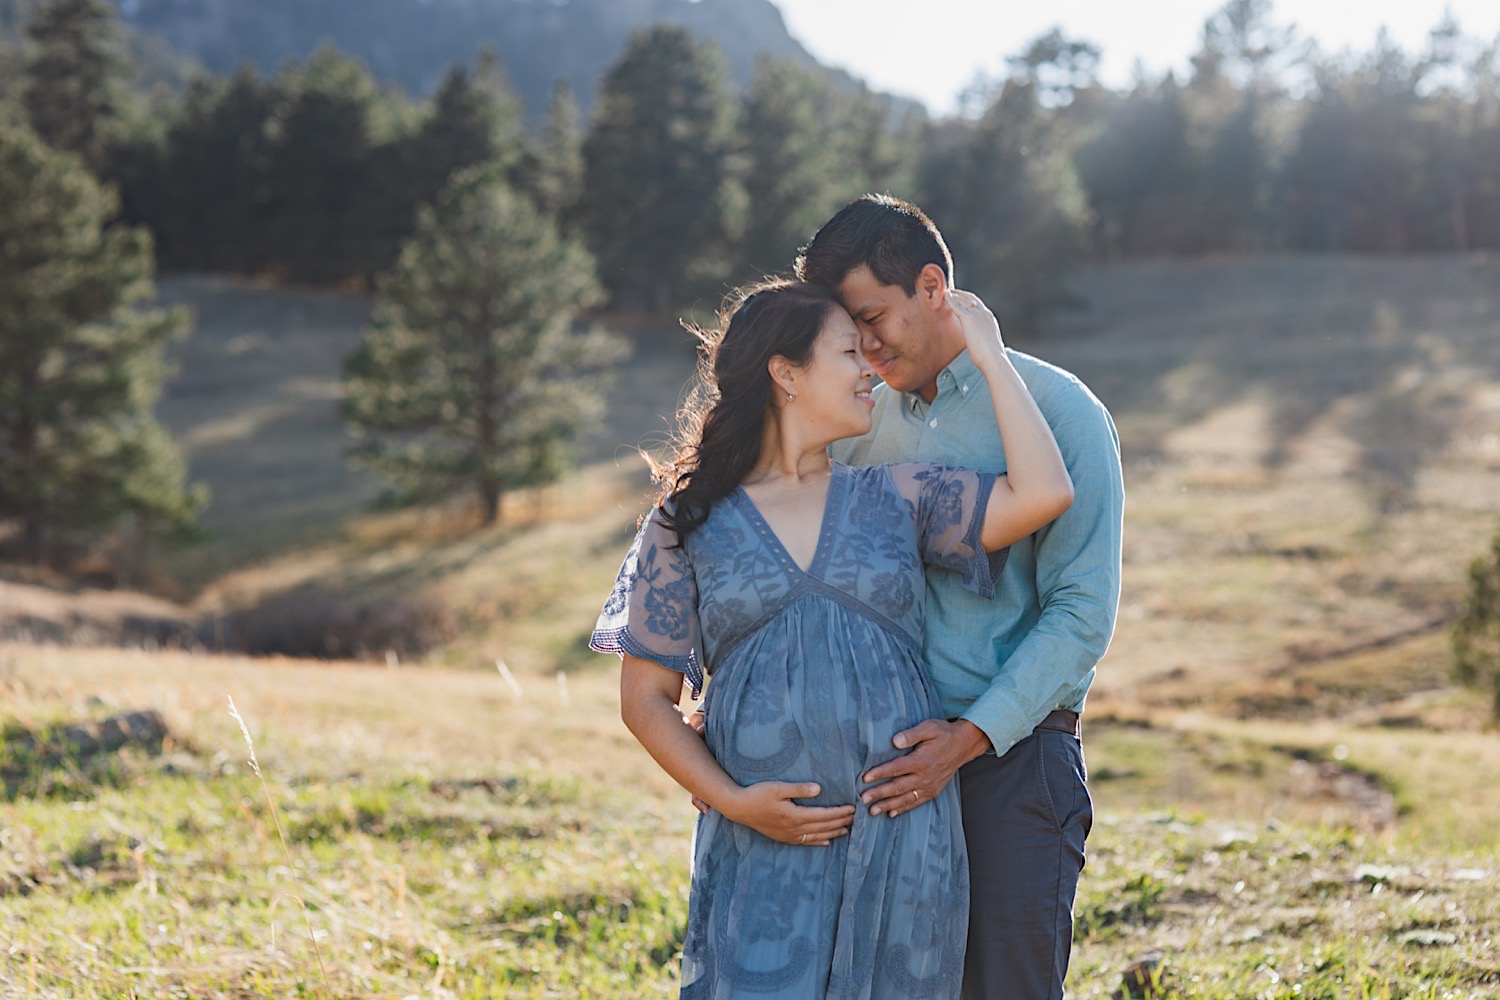 Boulder Colorado maternity photographer chautauqua park golden hour mountain session Gather and Abide Photography blue dress flowers baby's breathe asian american mom and dad firstborn